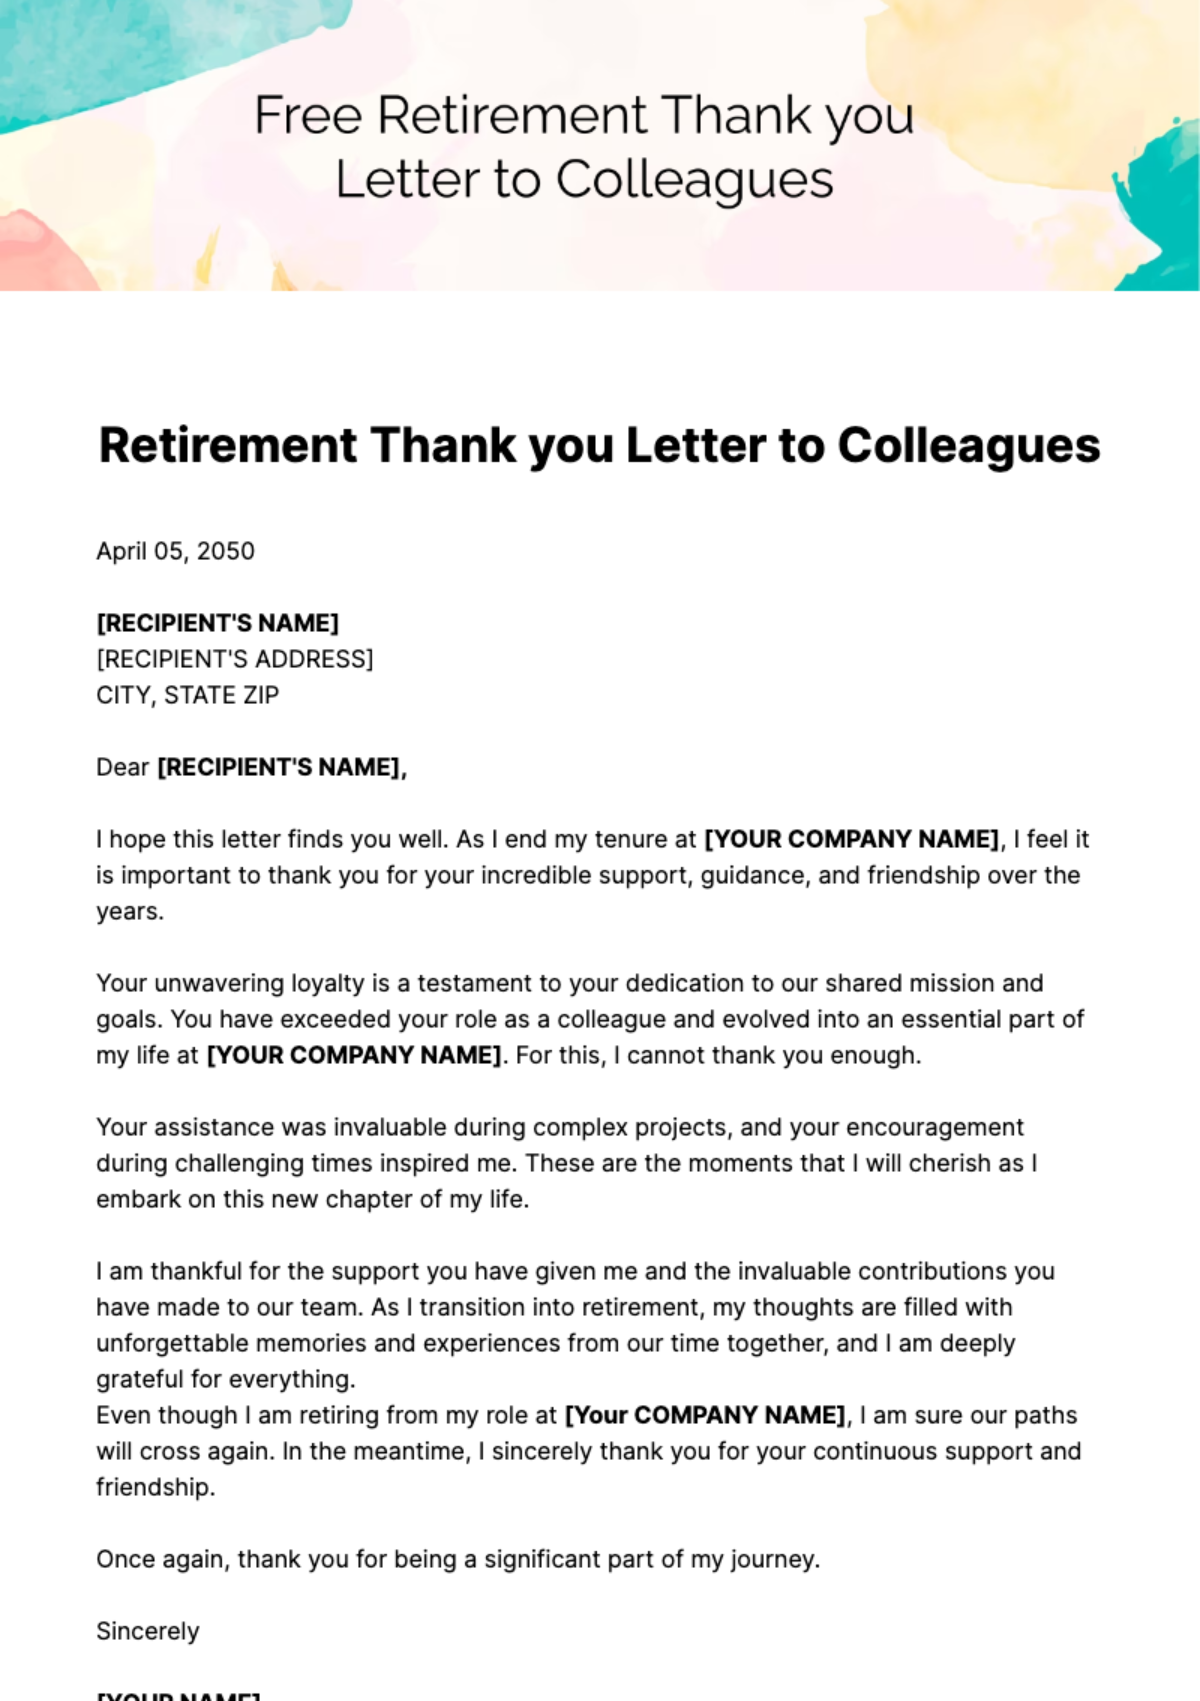 Retirement Thank you Letter to Colleagues Template